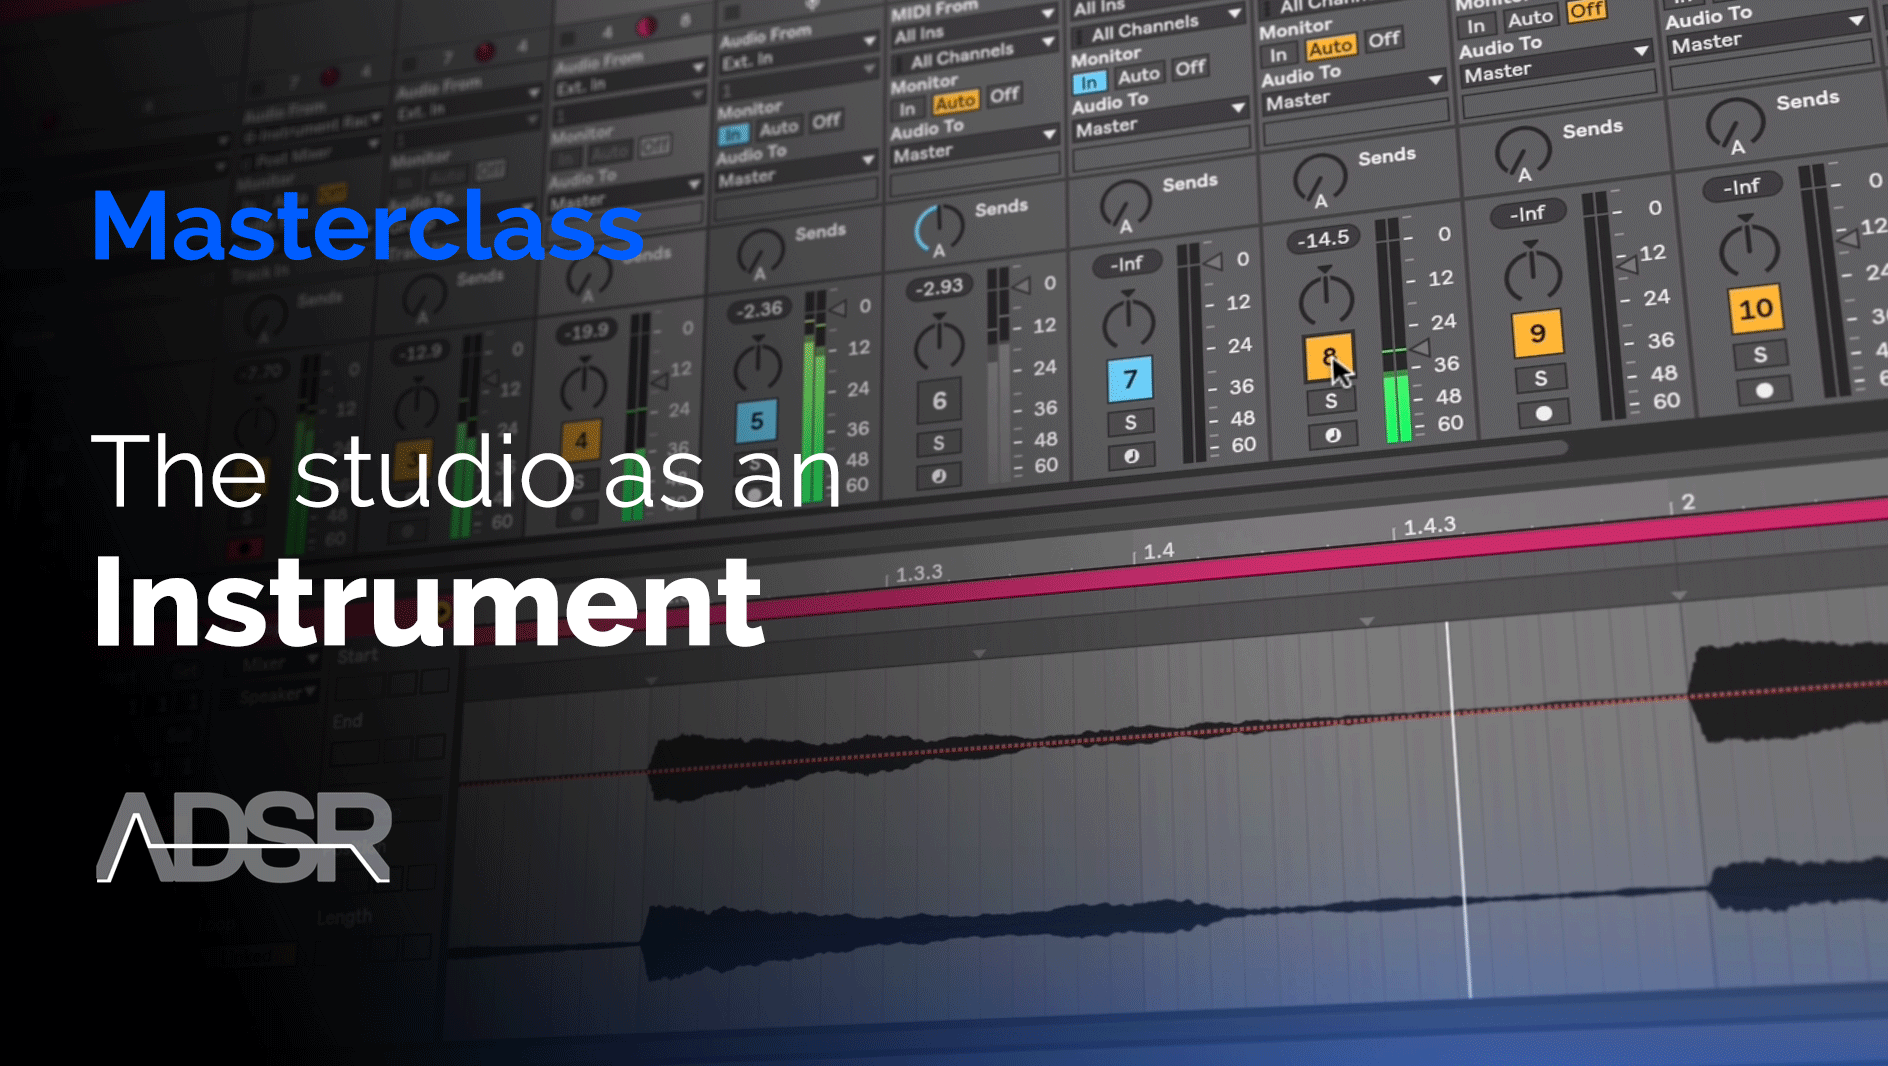 The studio as an instrument - explore classic techniques based on tape editing, effects processing and audio routing.